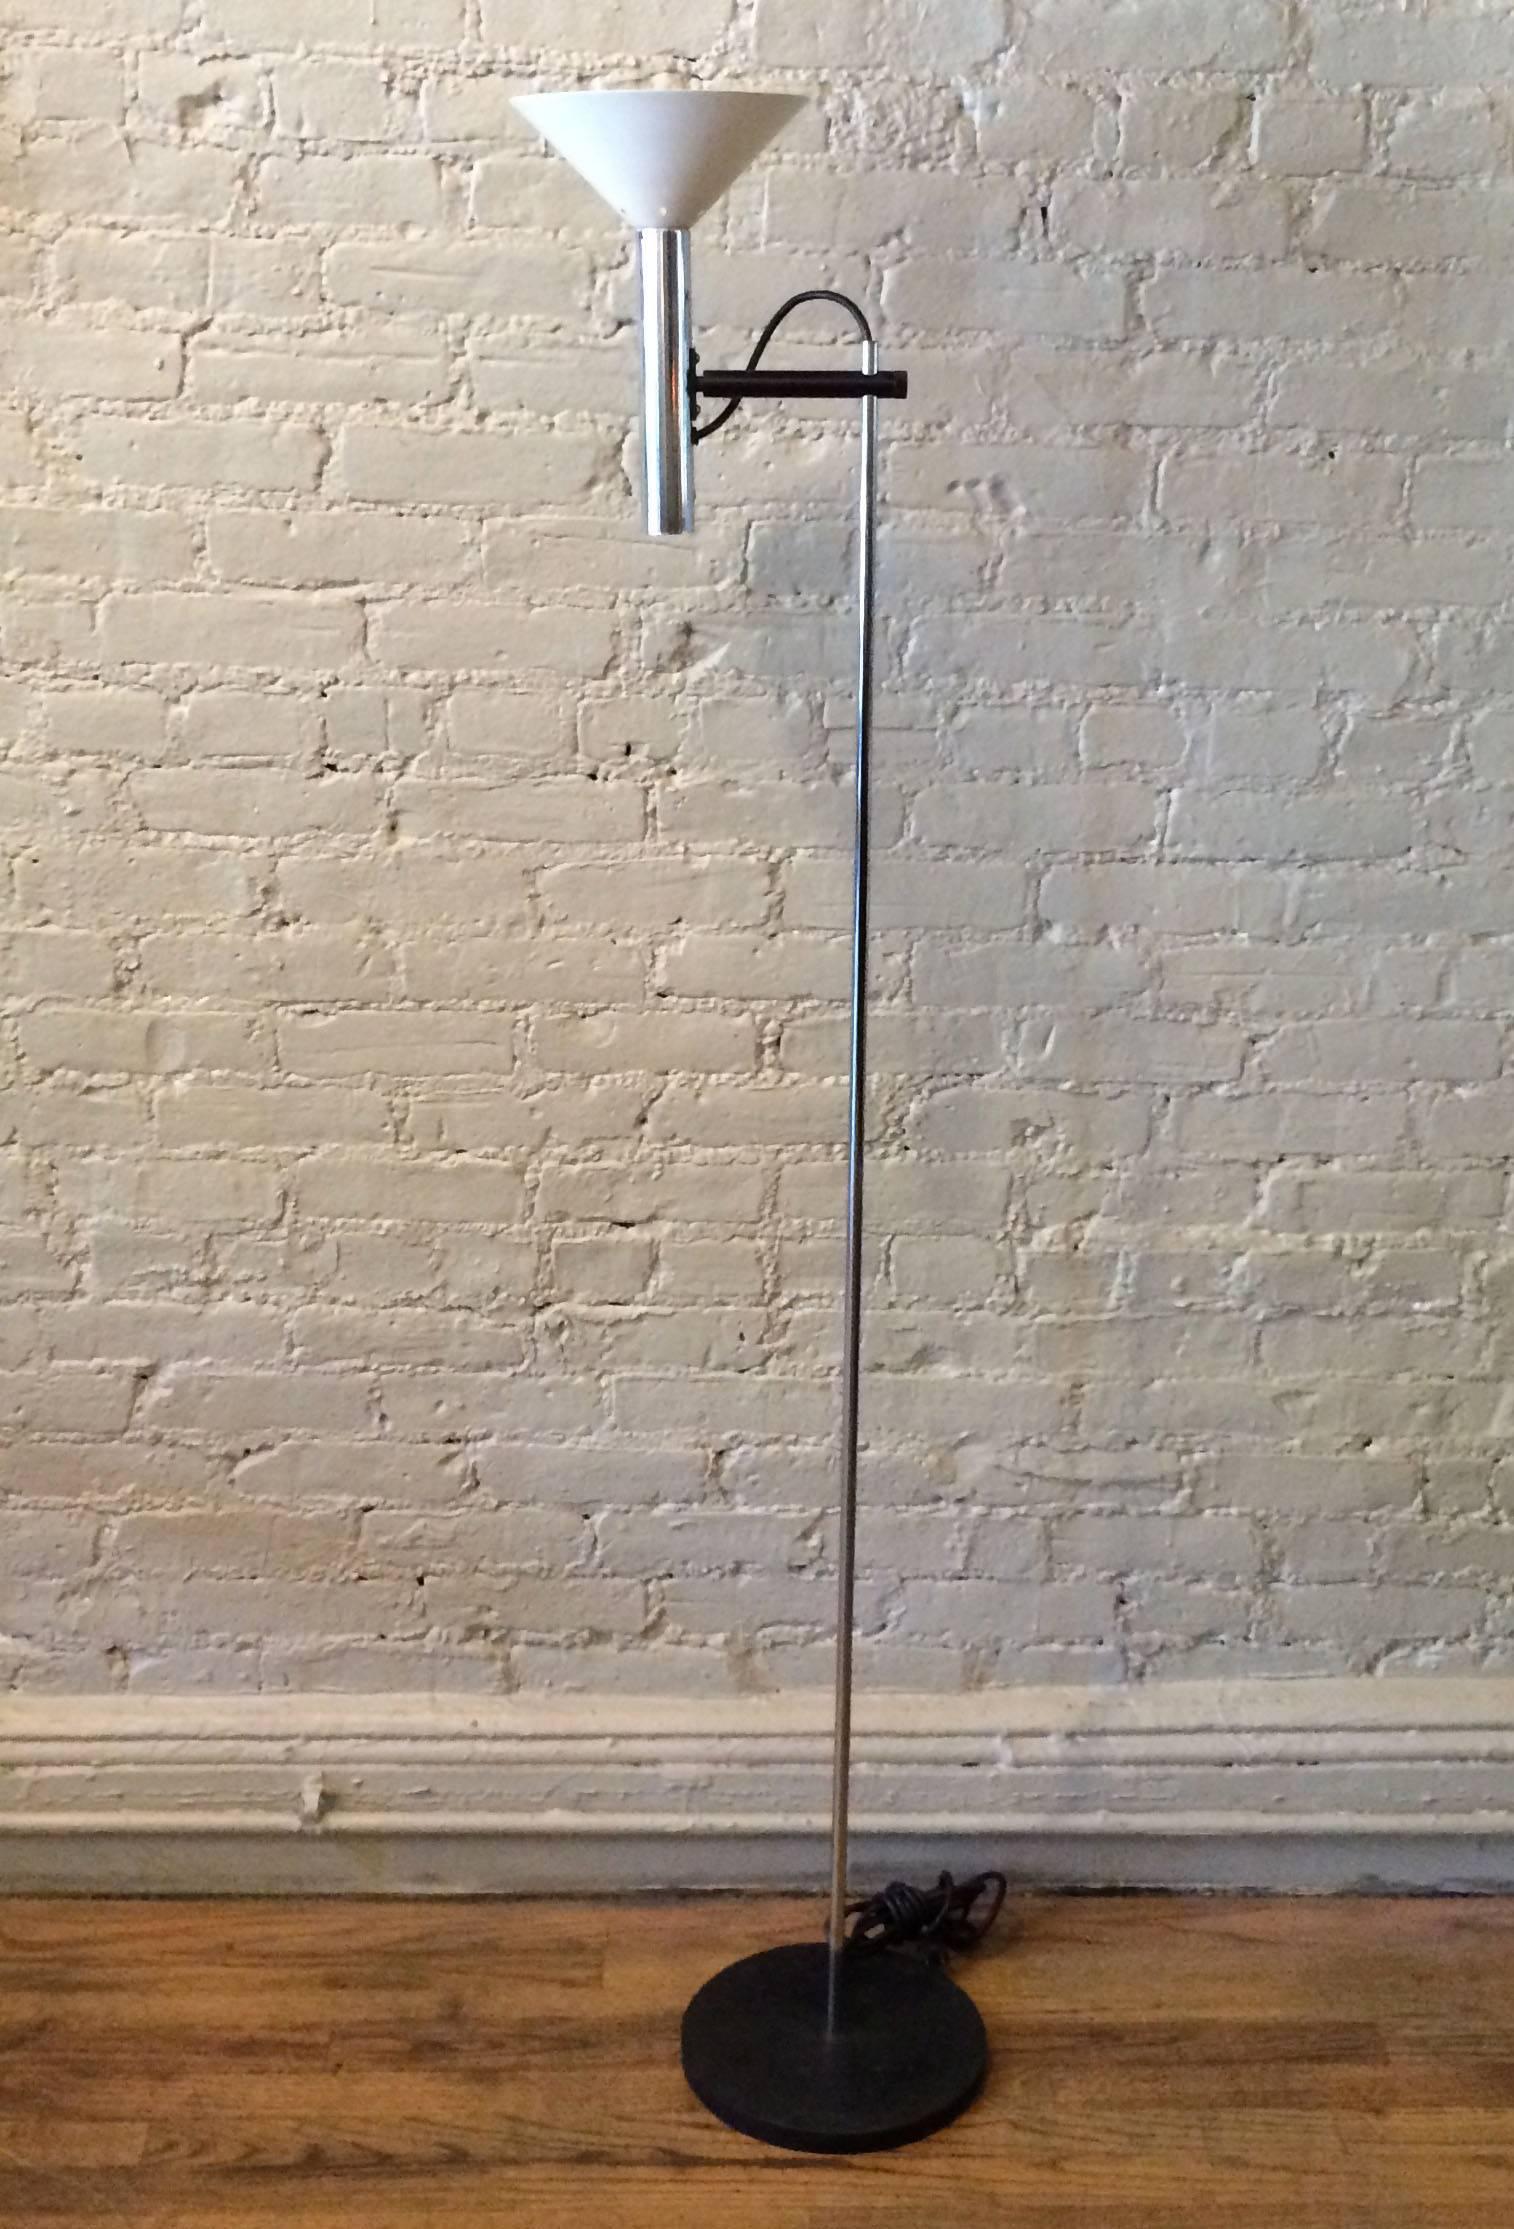 French, Mid-Century Modern, chrome, floor lamp with articulating cone shade that circulates 360 degrees in the style of Stilnovo or Pierre Guariche.